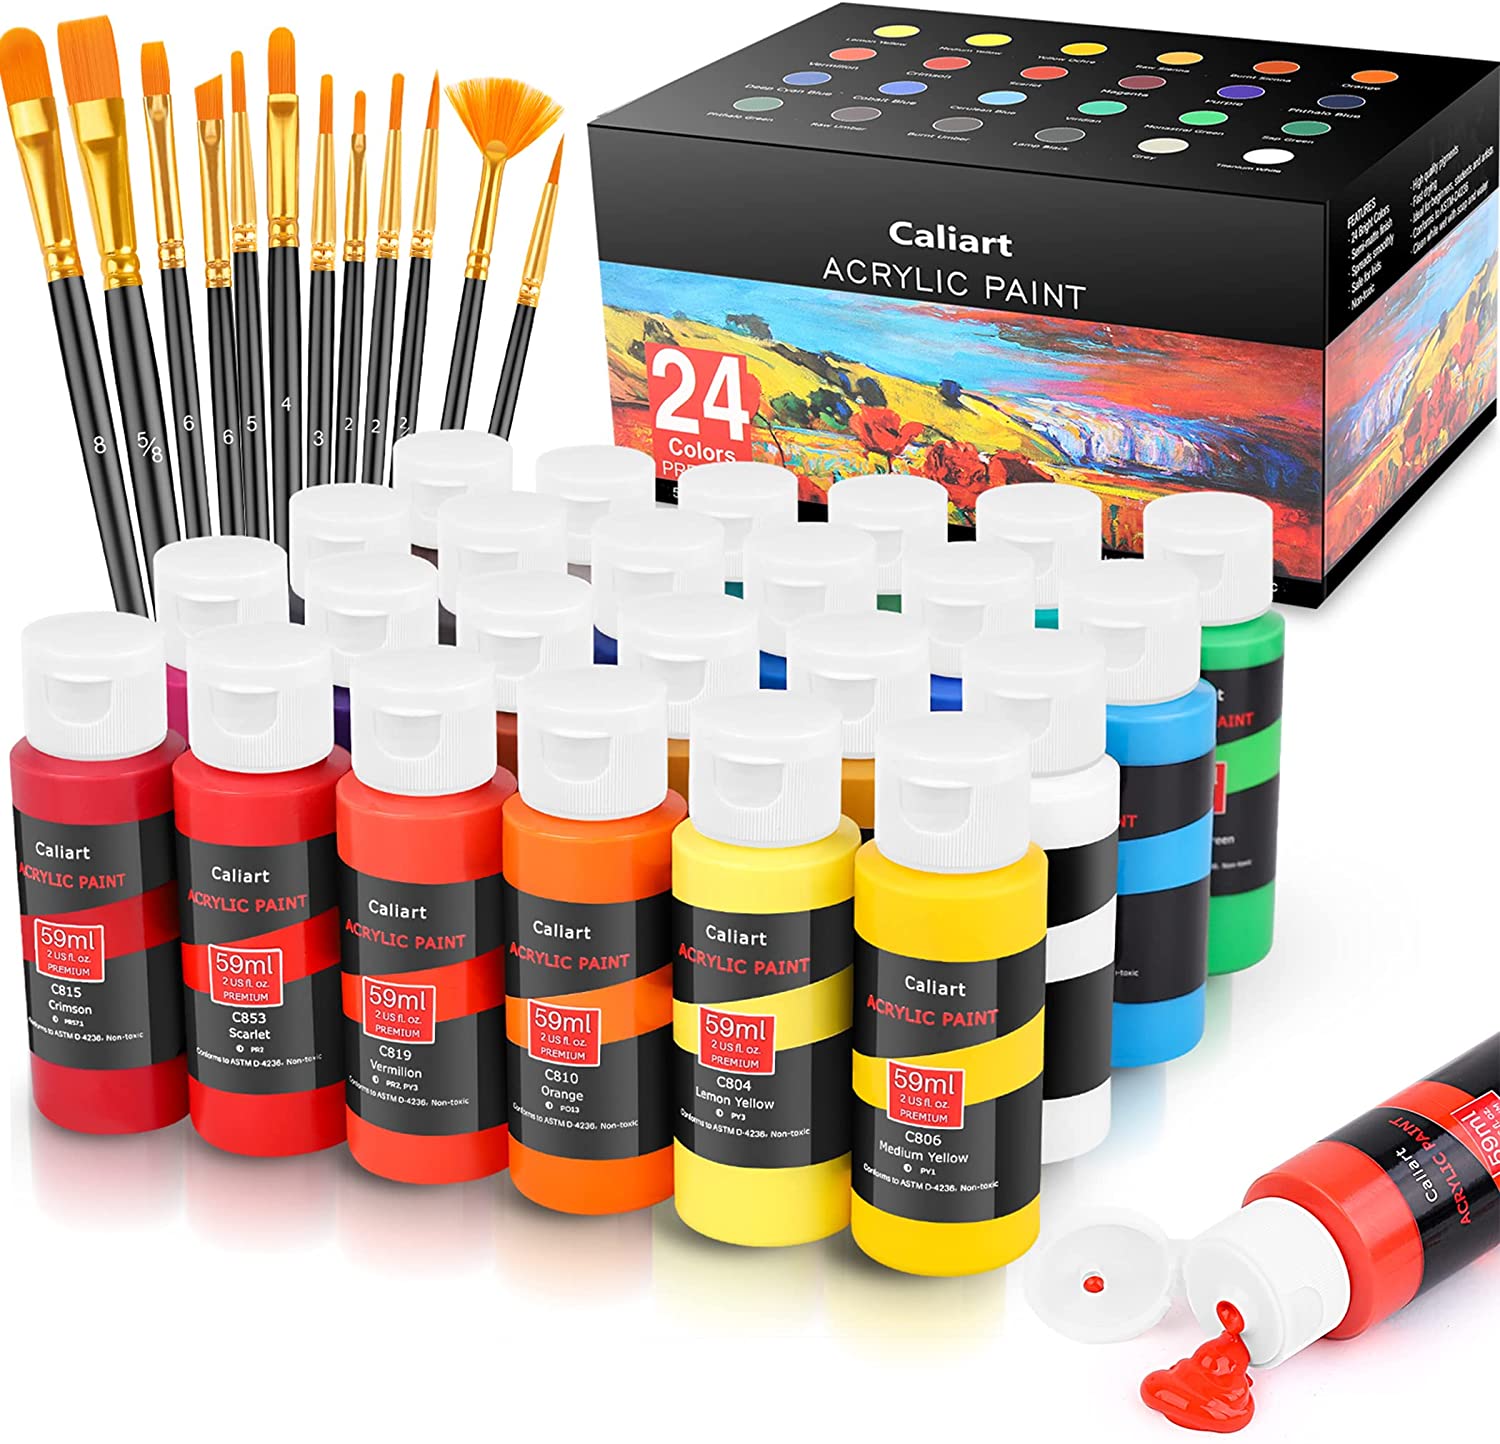 Caliart Non-Toxic Brushes & Acrylic Paints, 24-Count